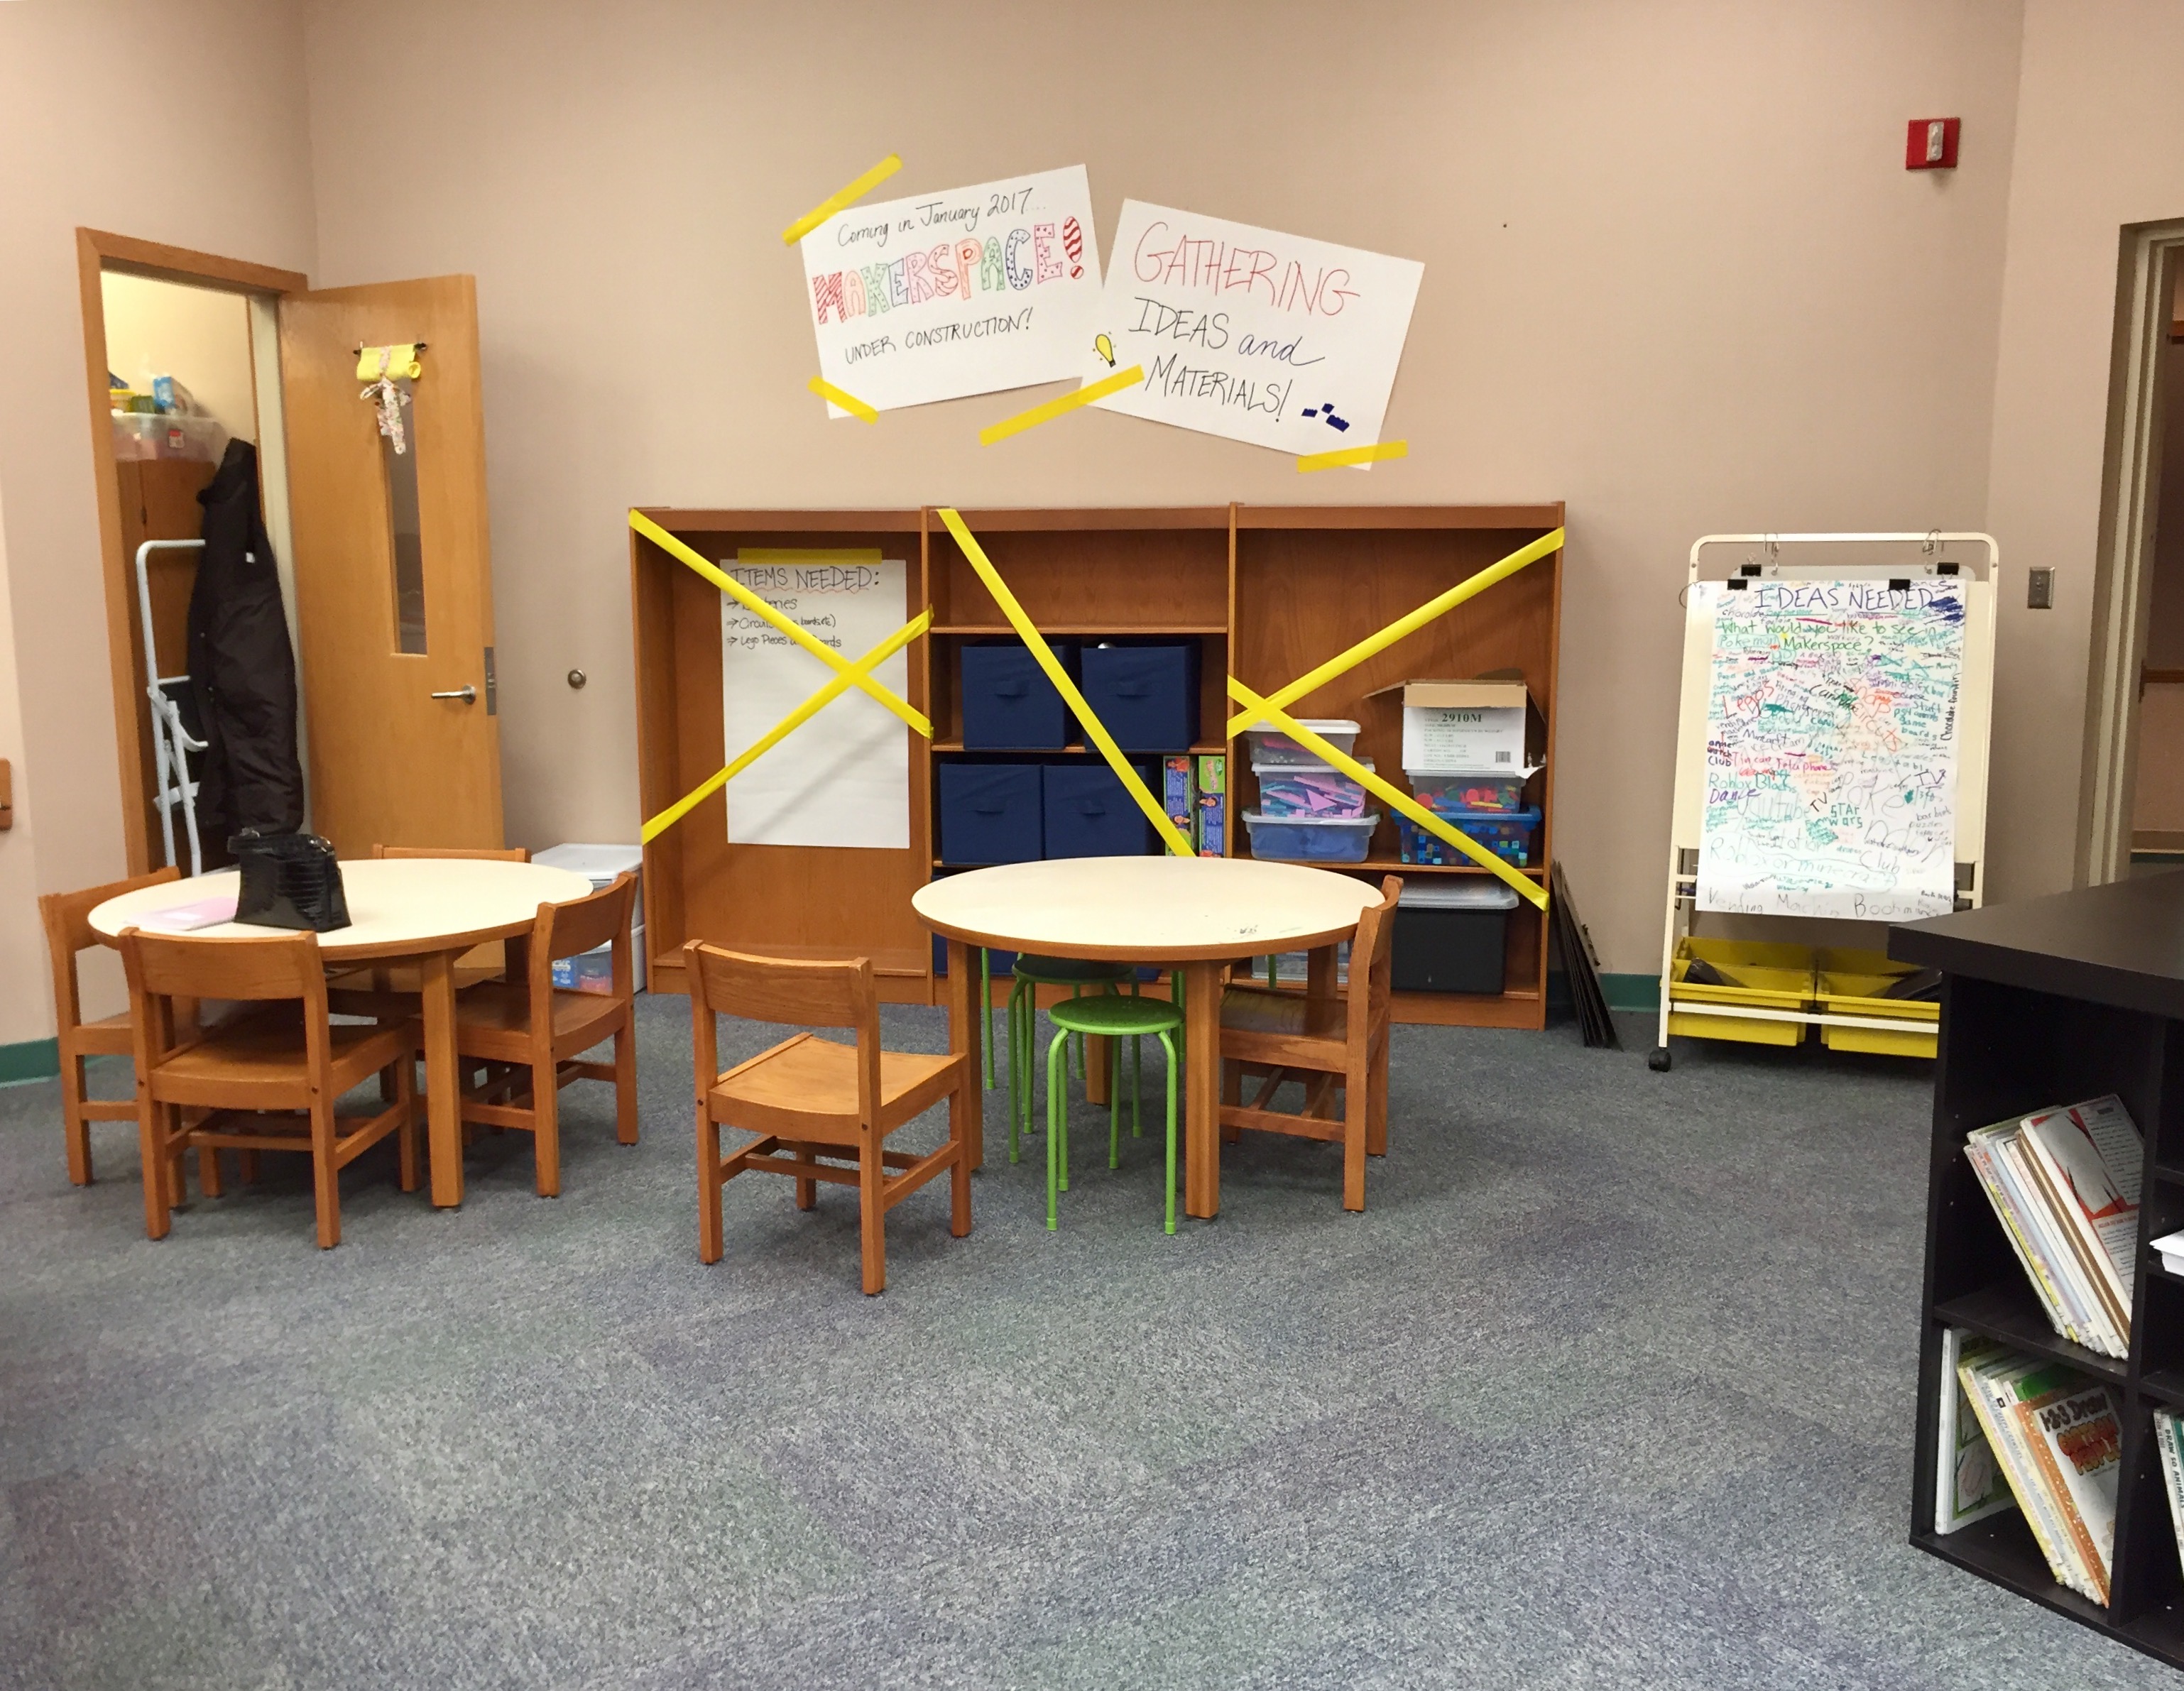 Large empty bookshelf with yellow tape criss crossed over it. @ tables with chairs. Posters on the walls.